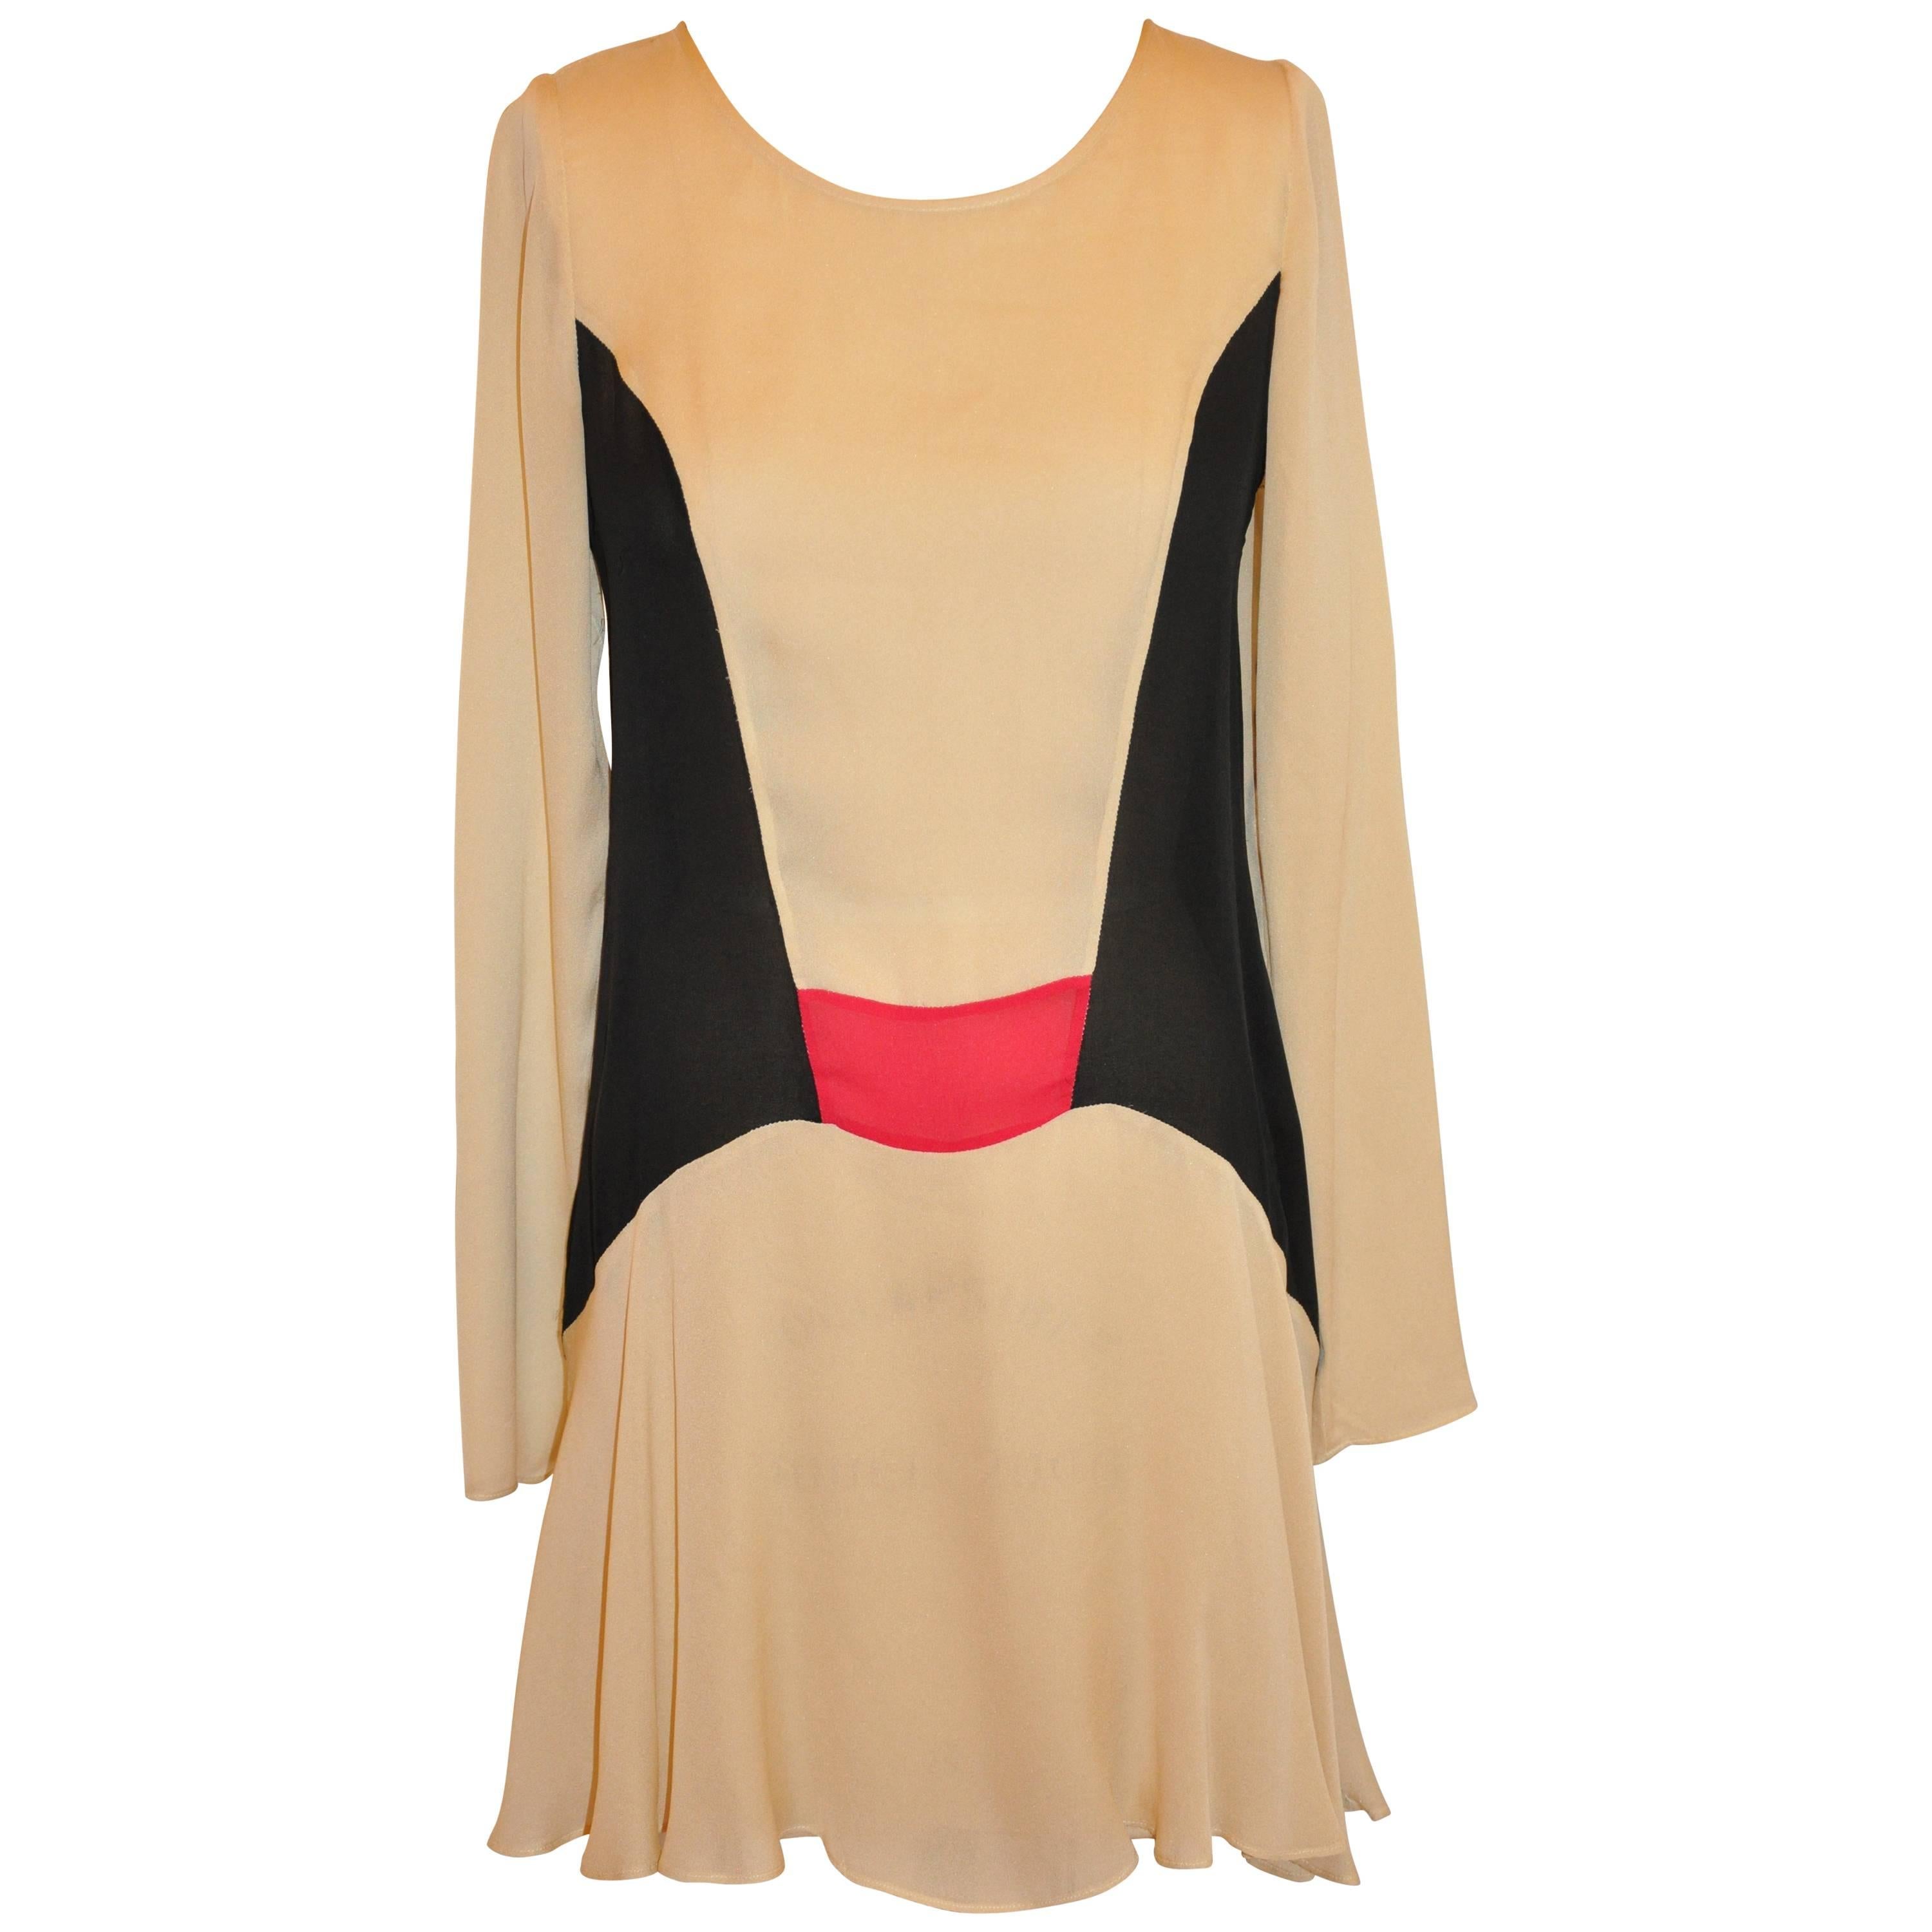 Ivory Accented with Black & Fuchsia Chiffon "French Seams" Tunic For Sale